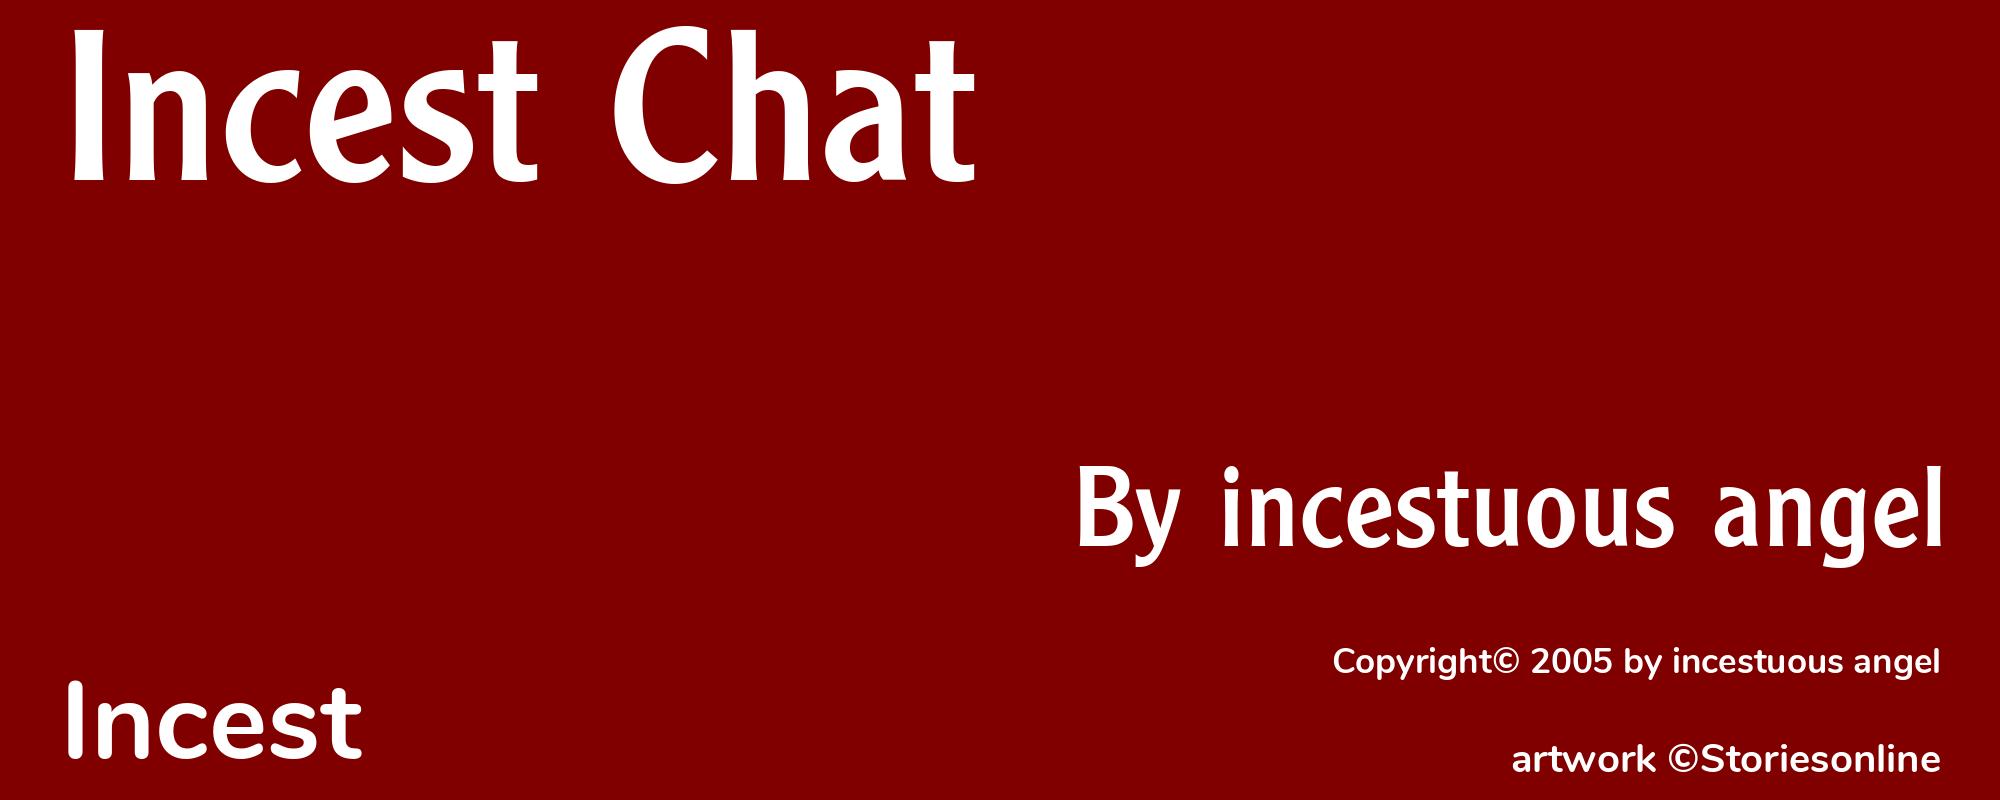 Incest Chat - Cover